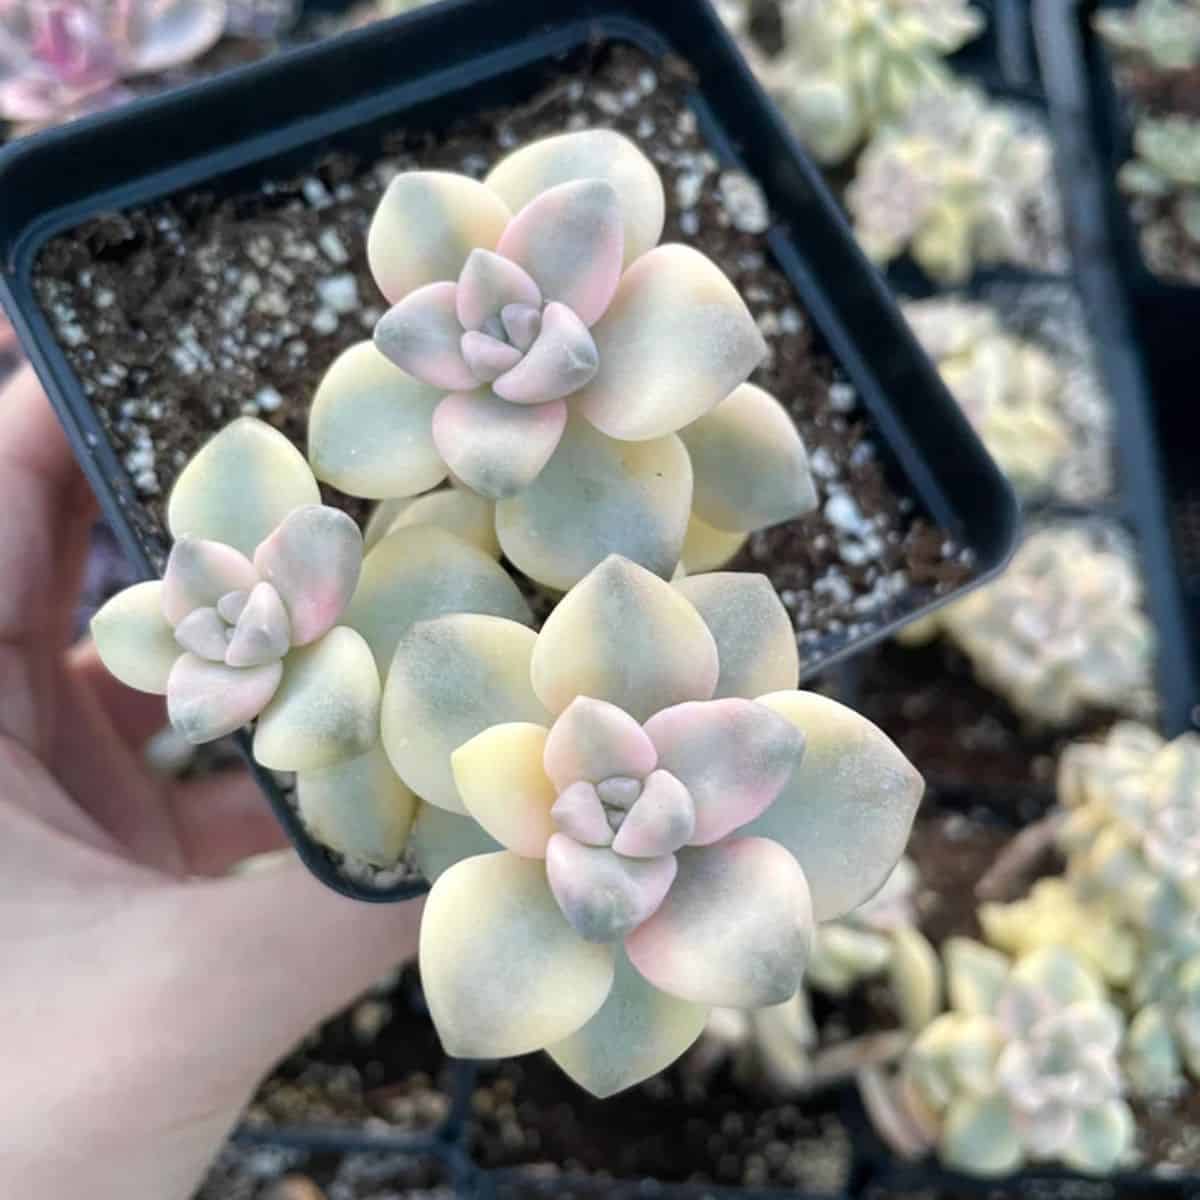 Graptopetalum titubans in a black pot held by hand.